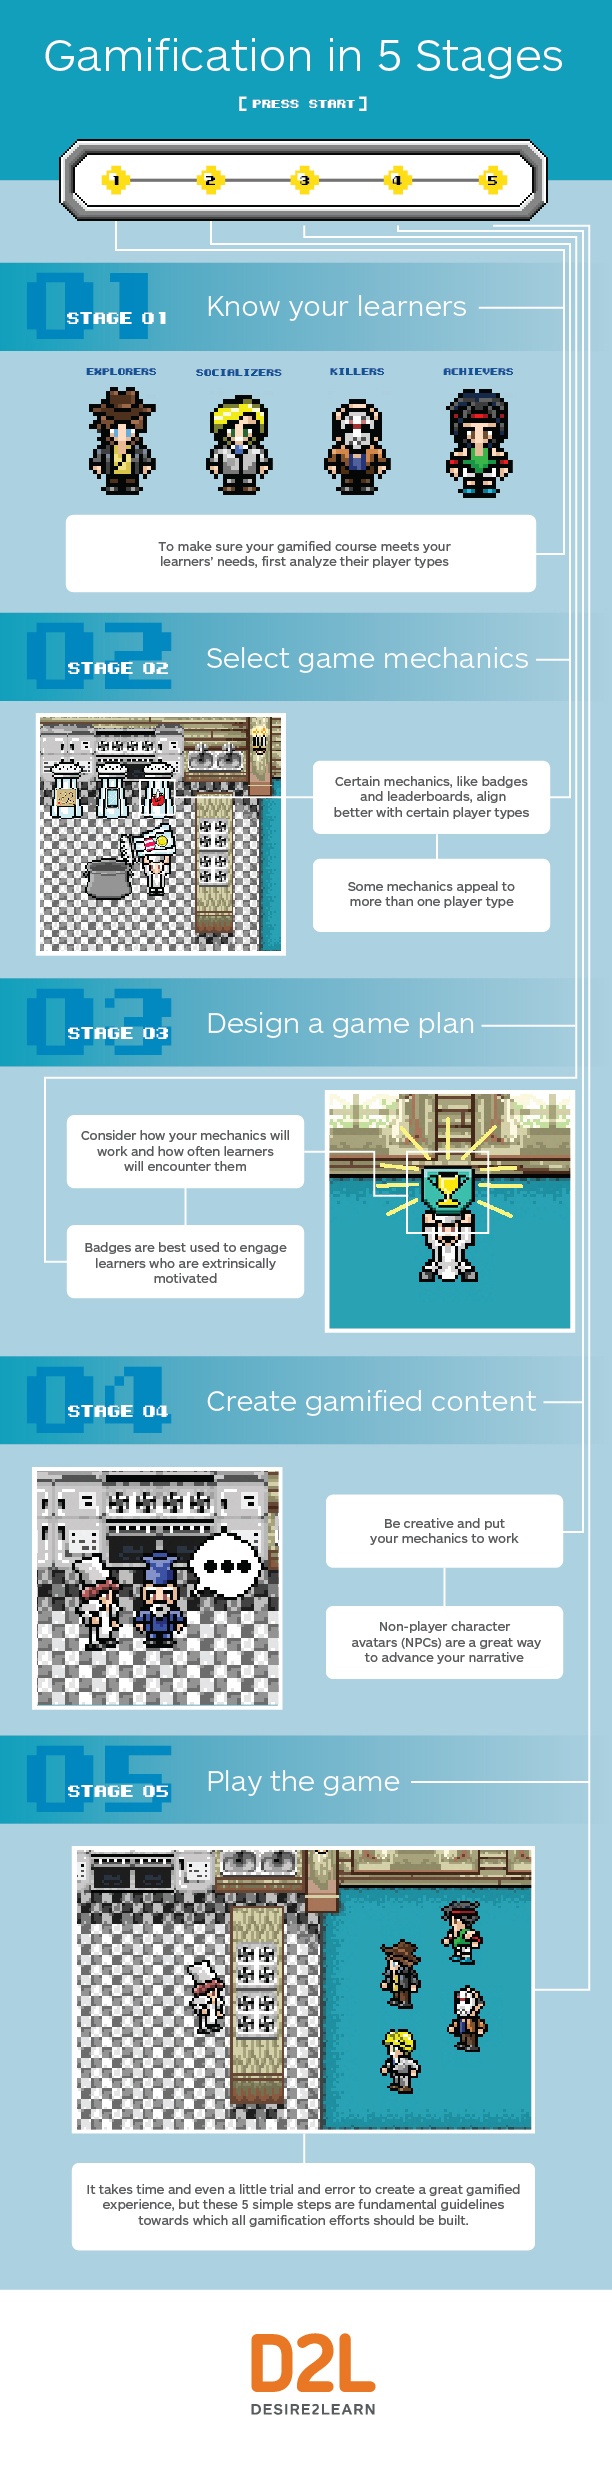 5 Stages to Gamification Infographic